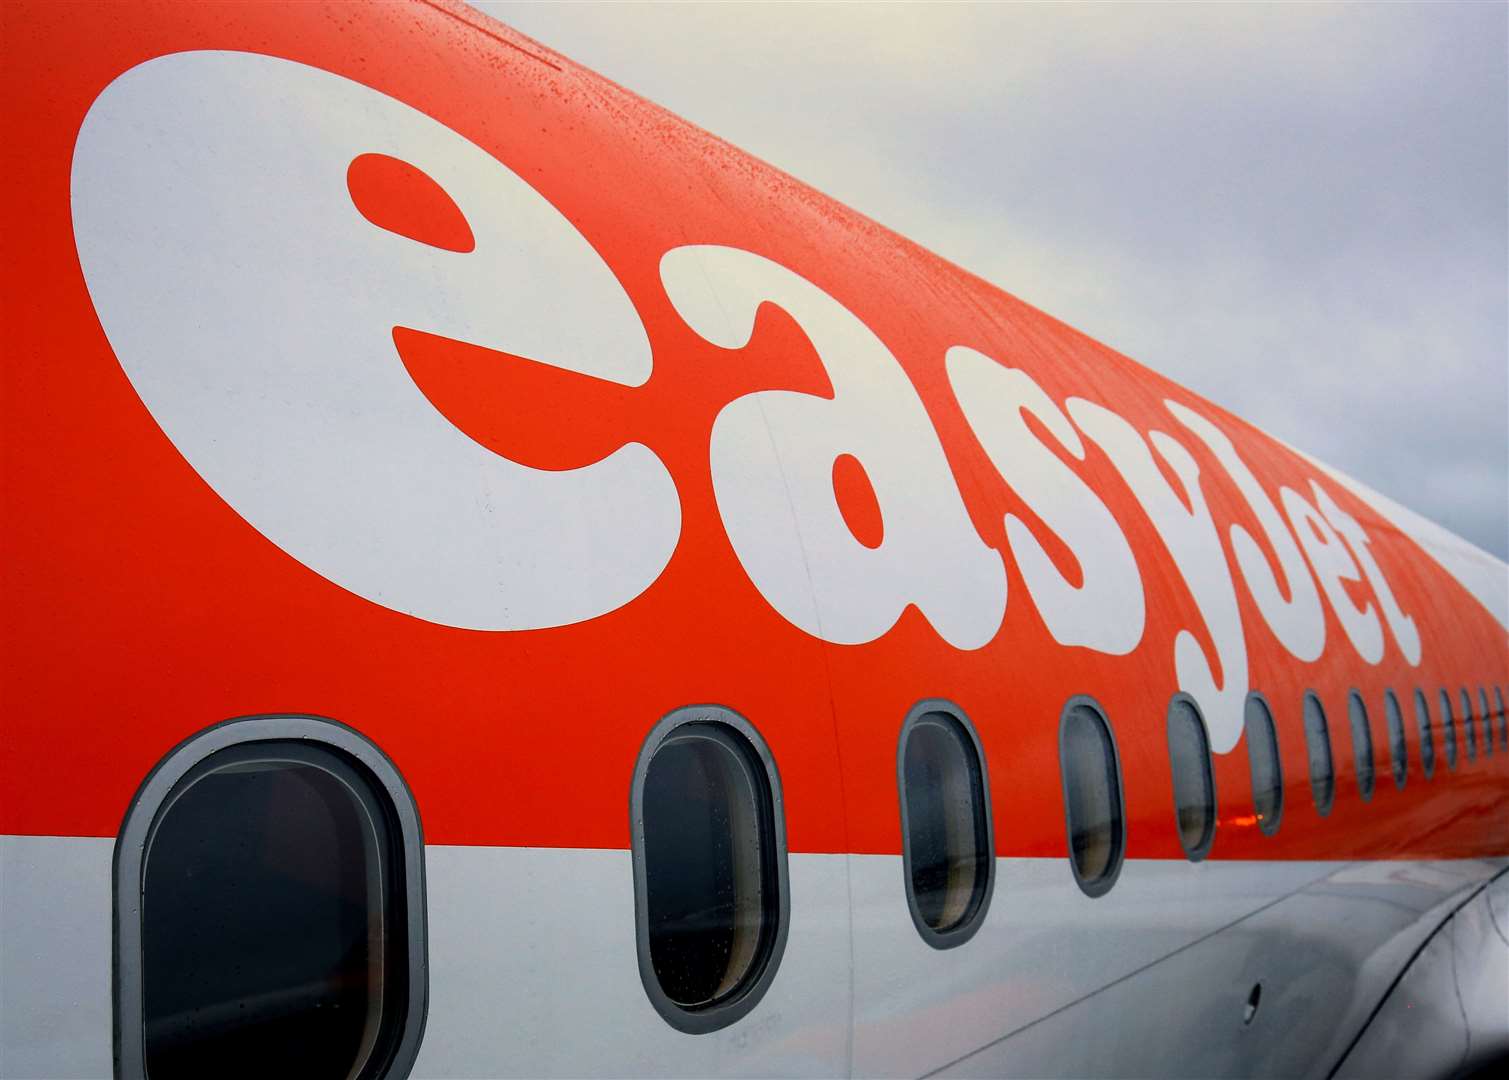 EasyJet said it has been affected by high levels of staff sickness (Gareth Fuller/PA)